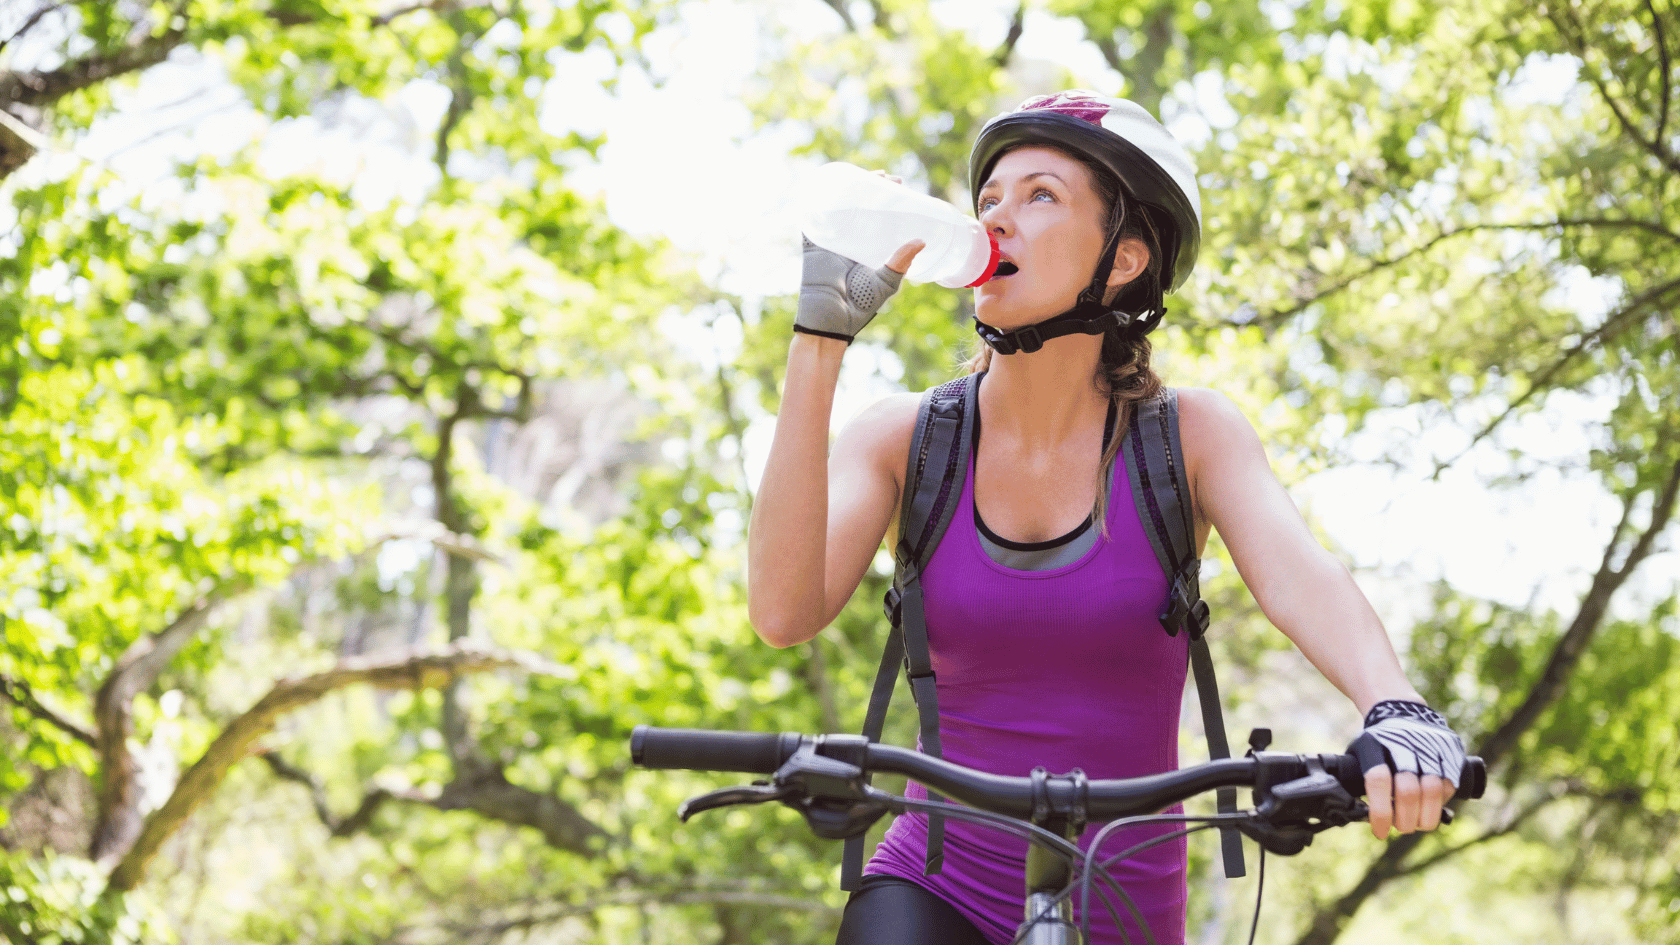 Tips for Using Insulated Cycling Water Bottles Effectively